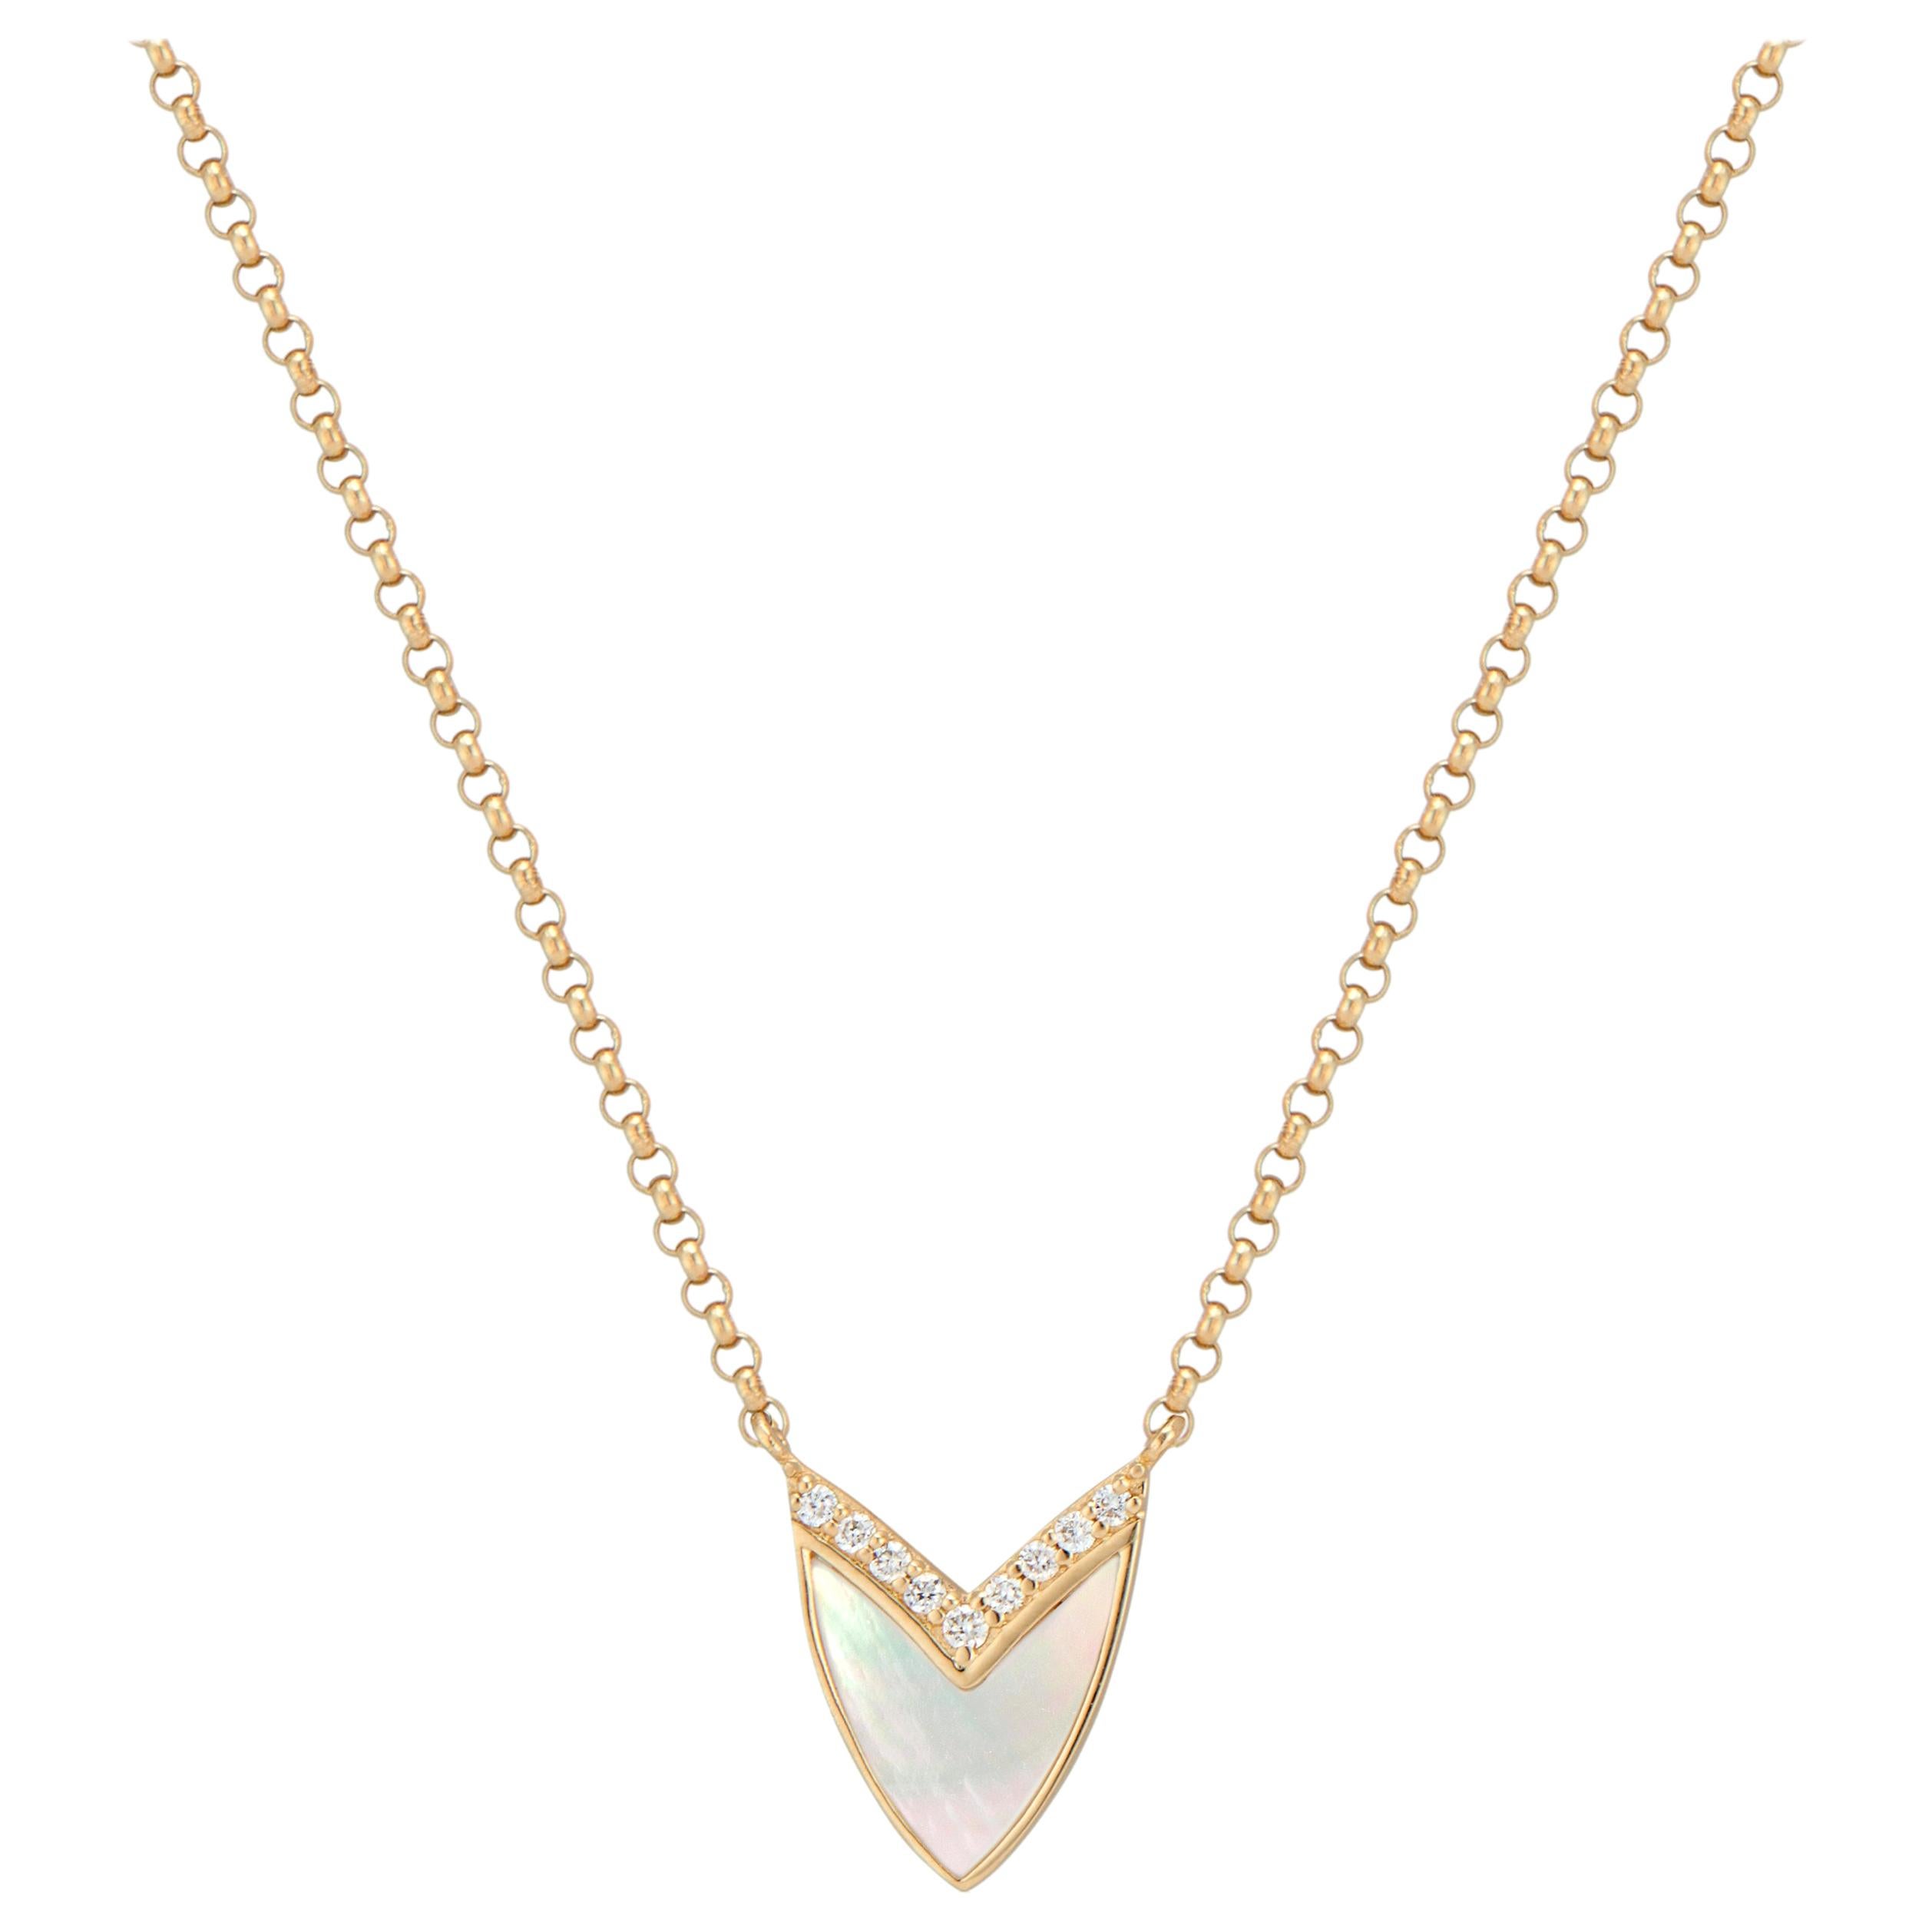 Cubist Heart Necklace with Mother of Pearl and Diamonds in Yellow Gold